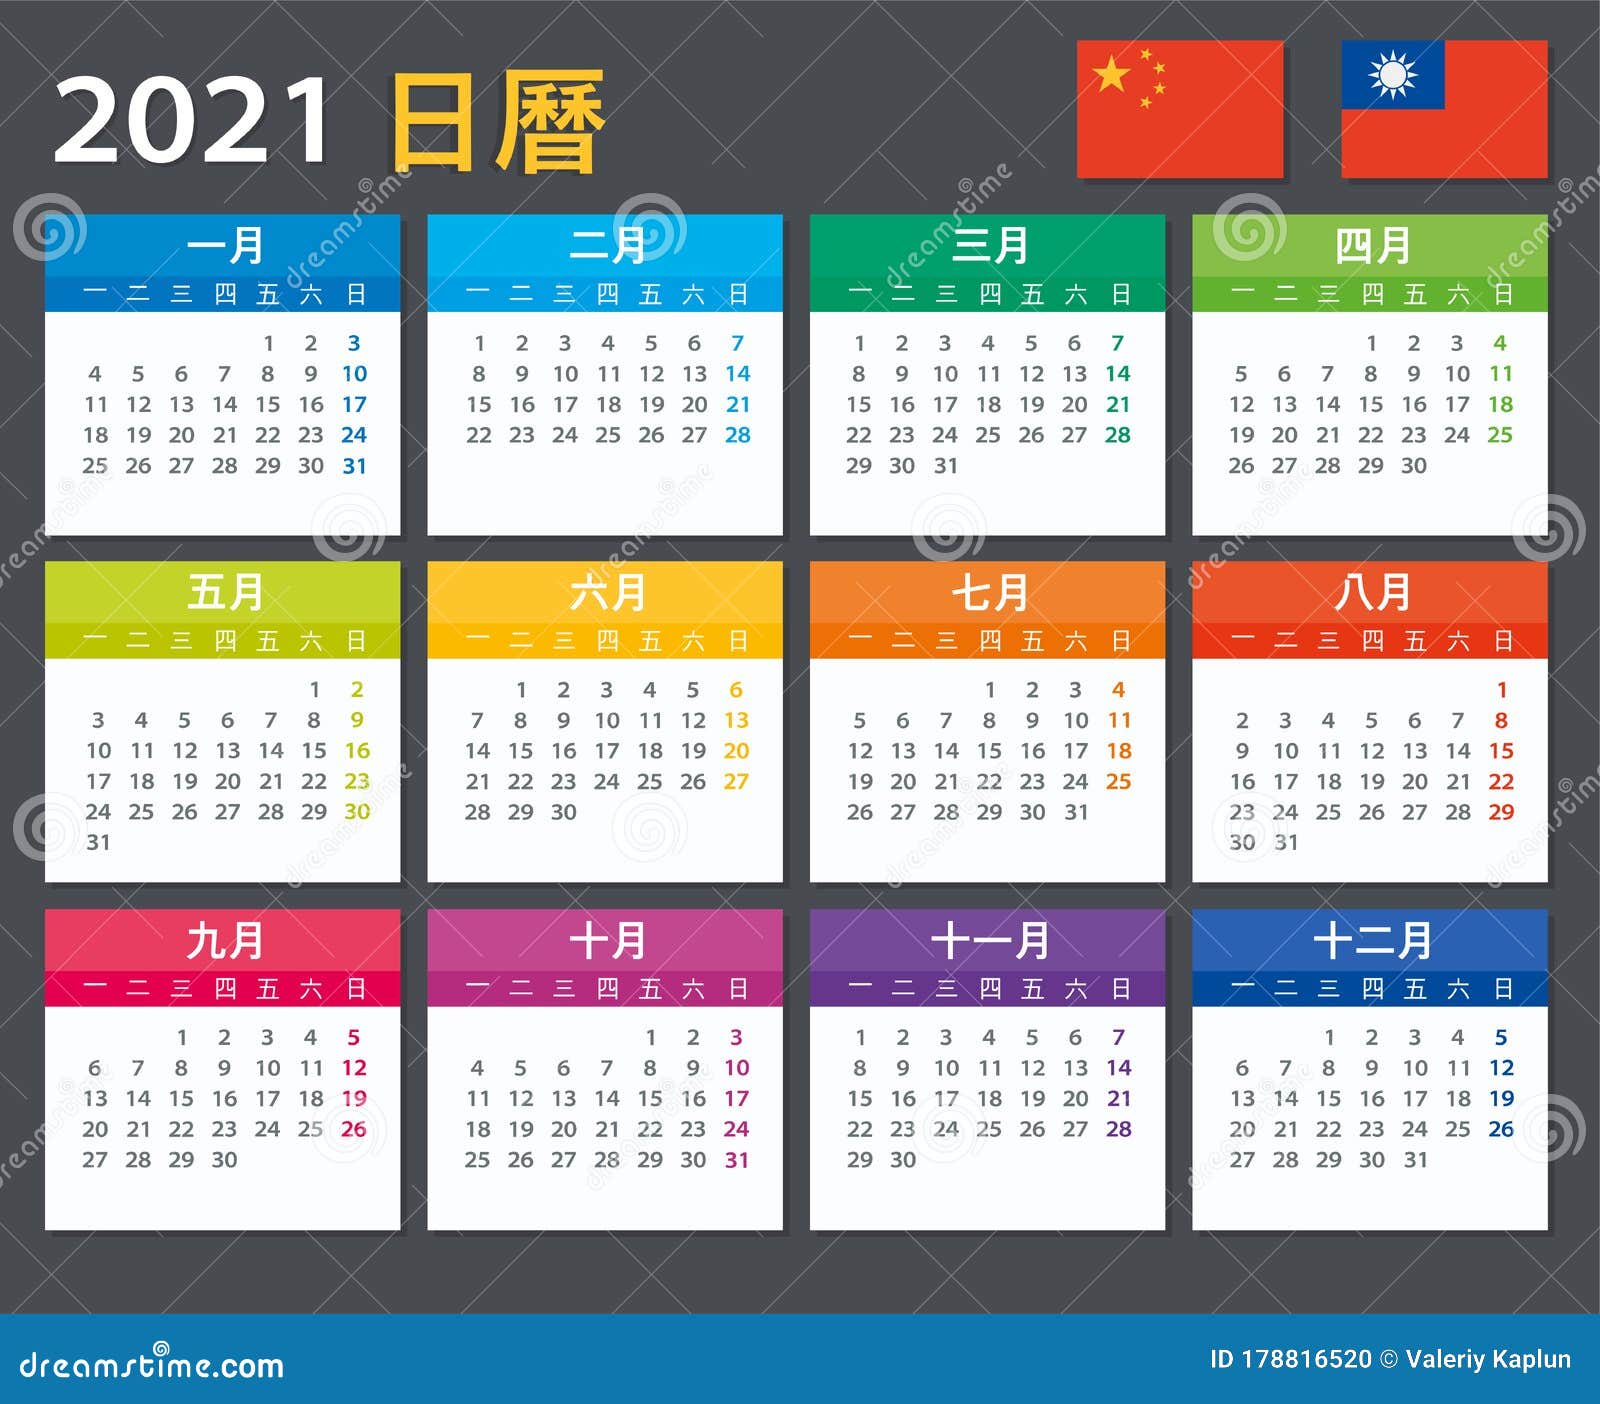 Chinese calendar today 2021